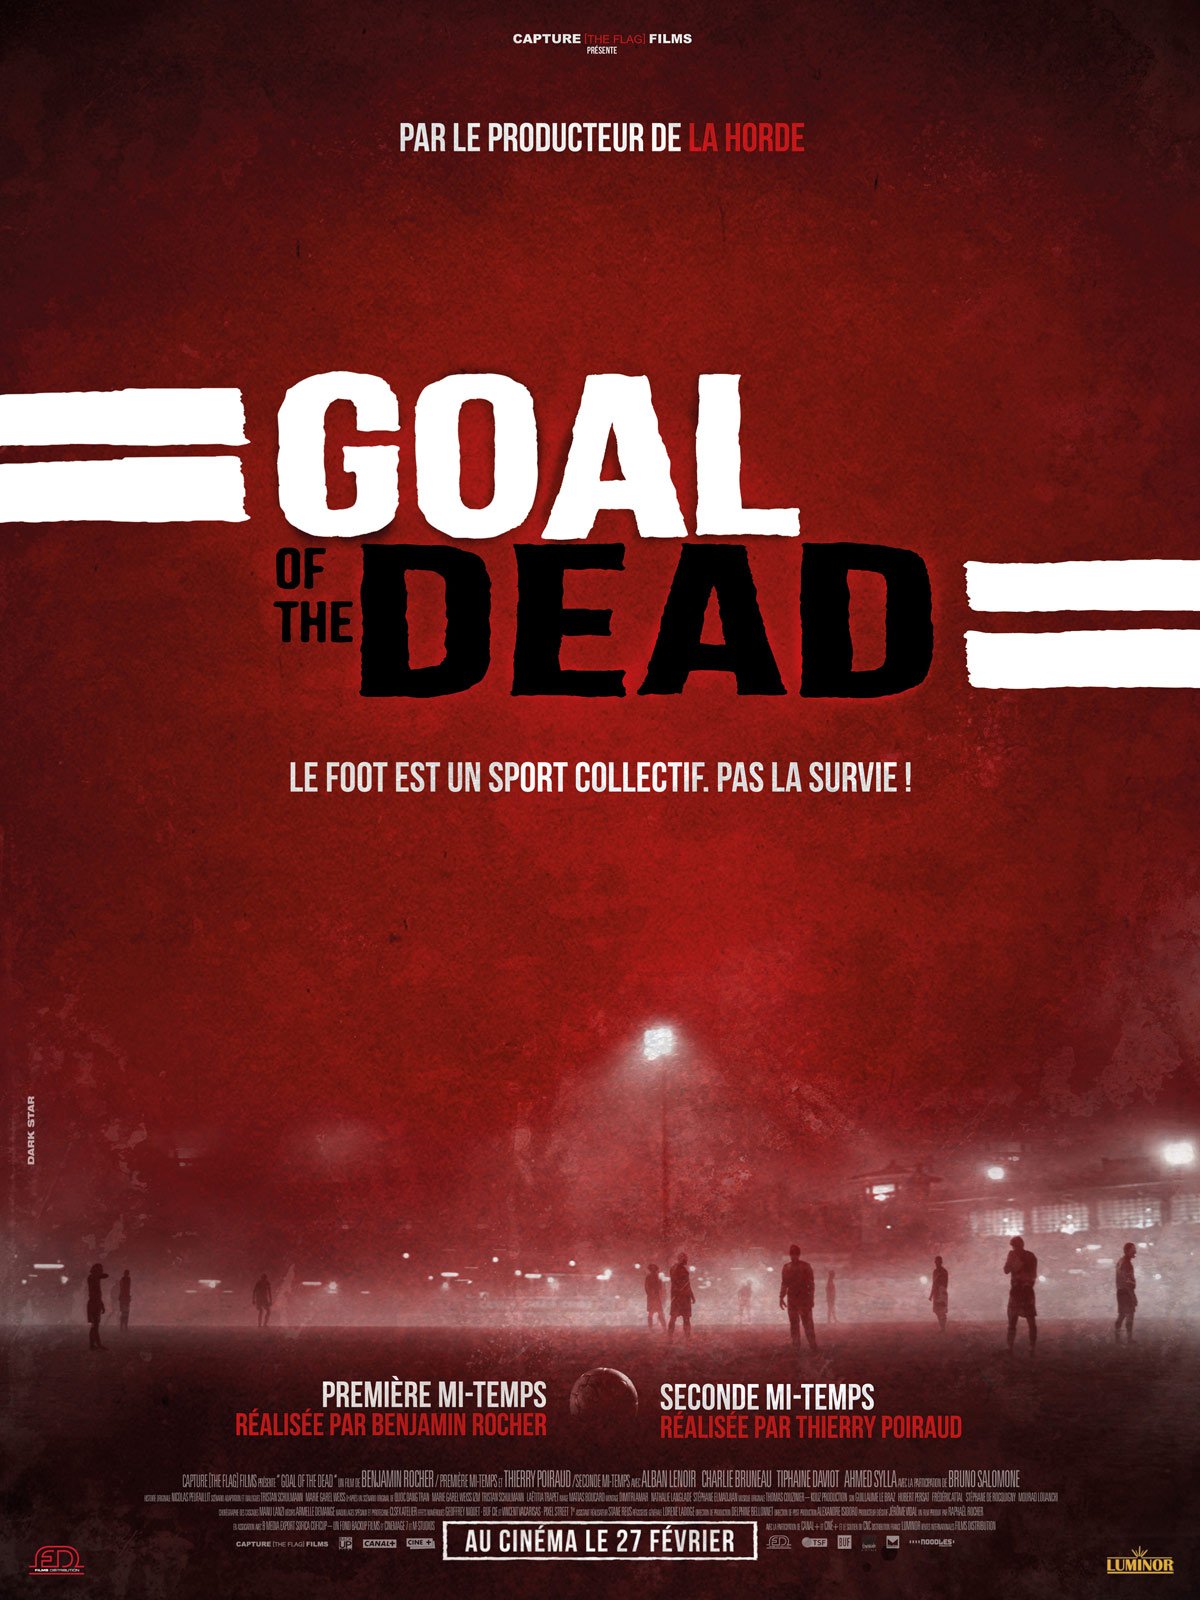 Goal of the dead - Première mi-temps streaming